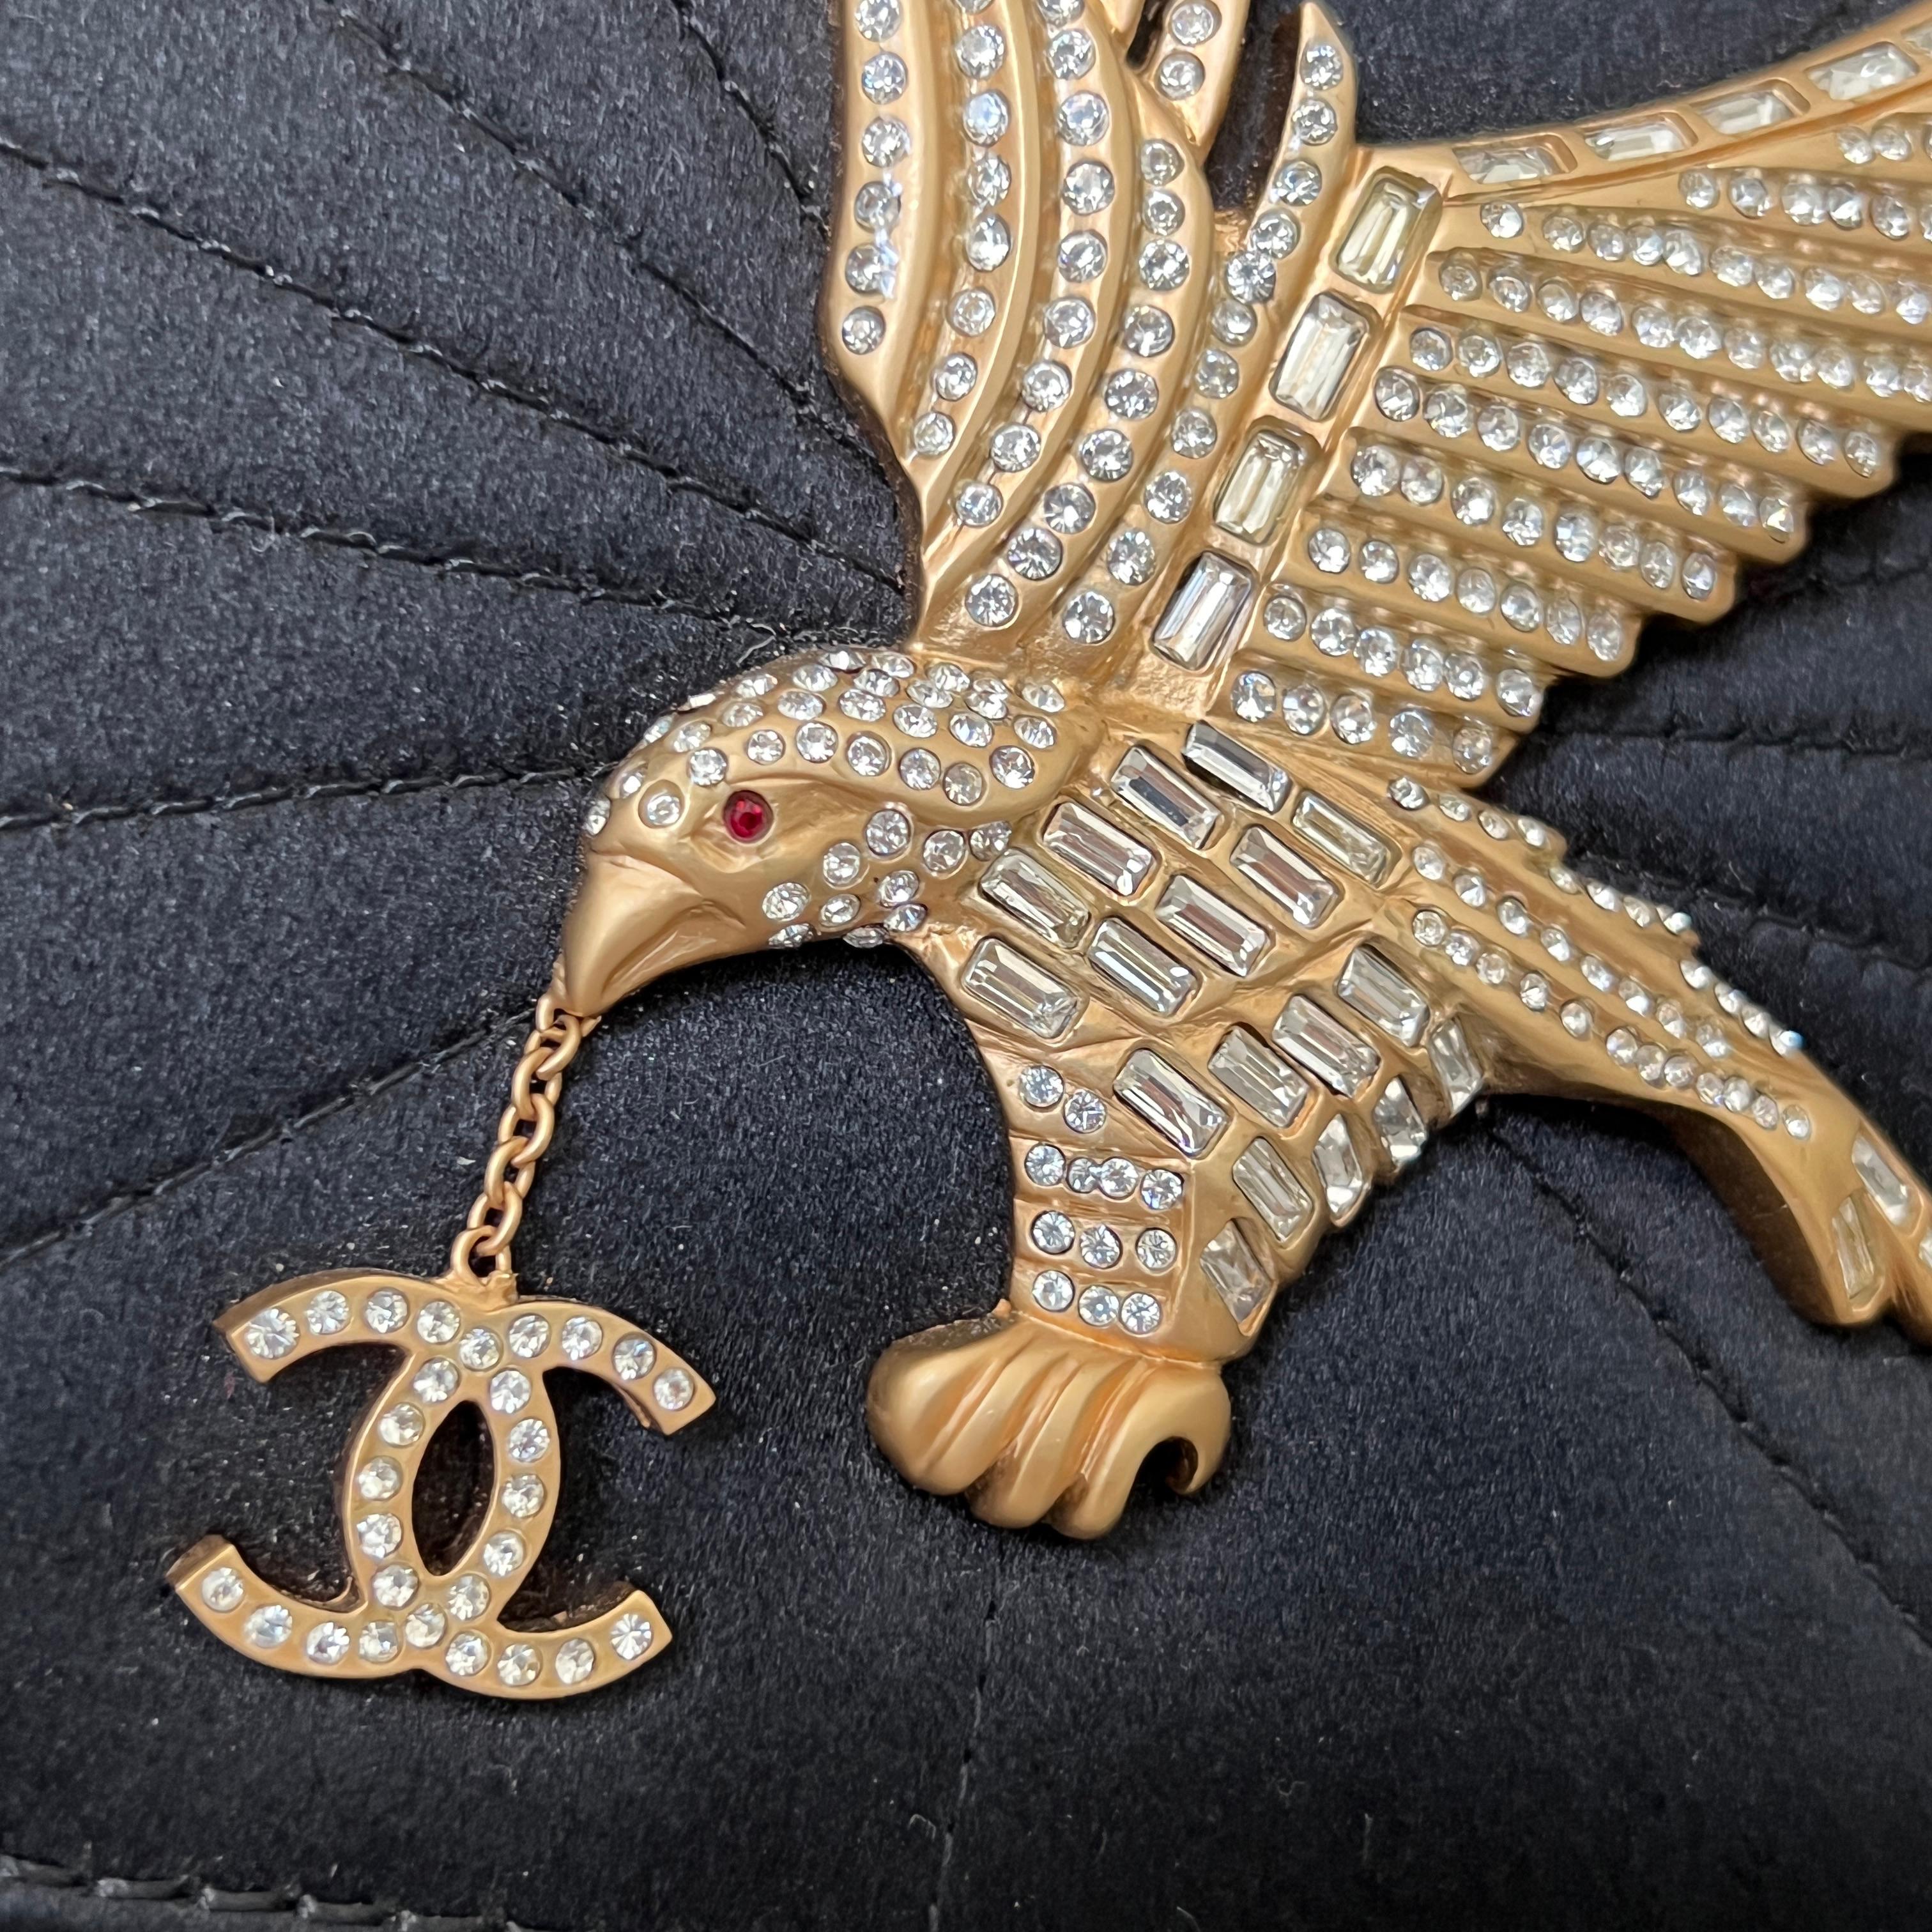 Chanel Extremely Rare CC Eagle Bag 3